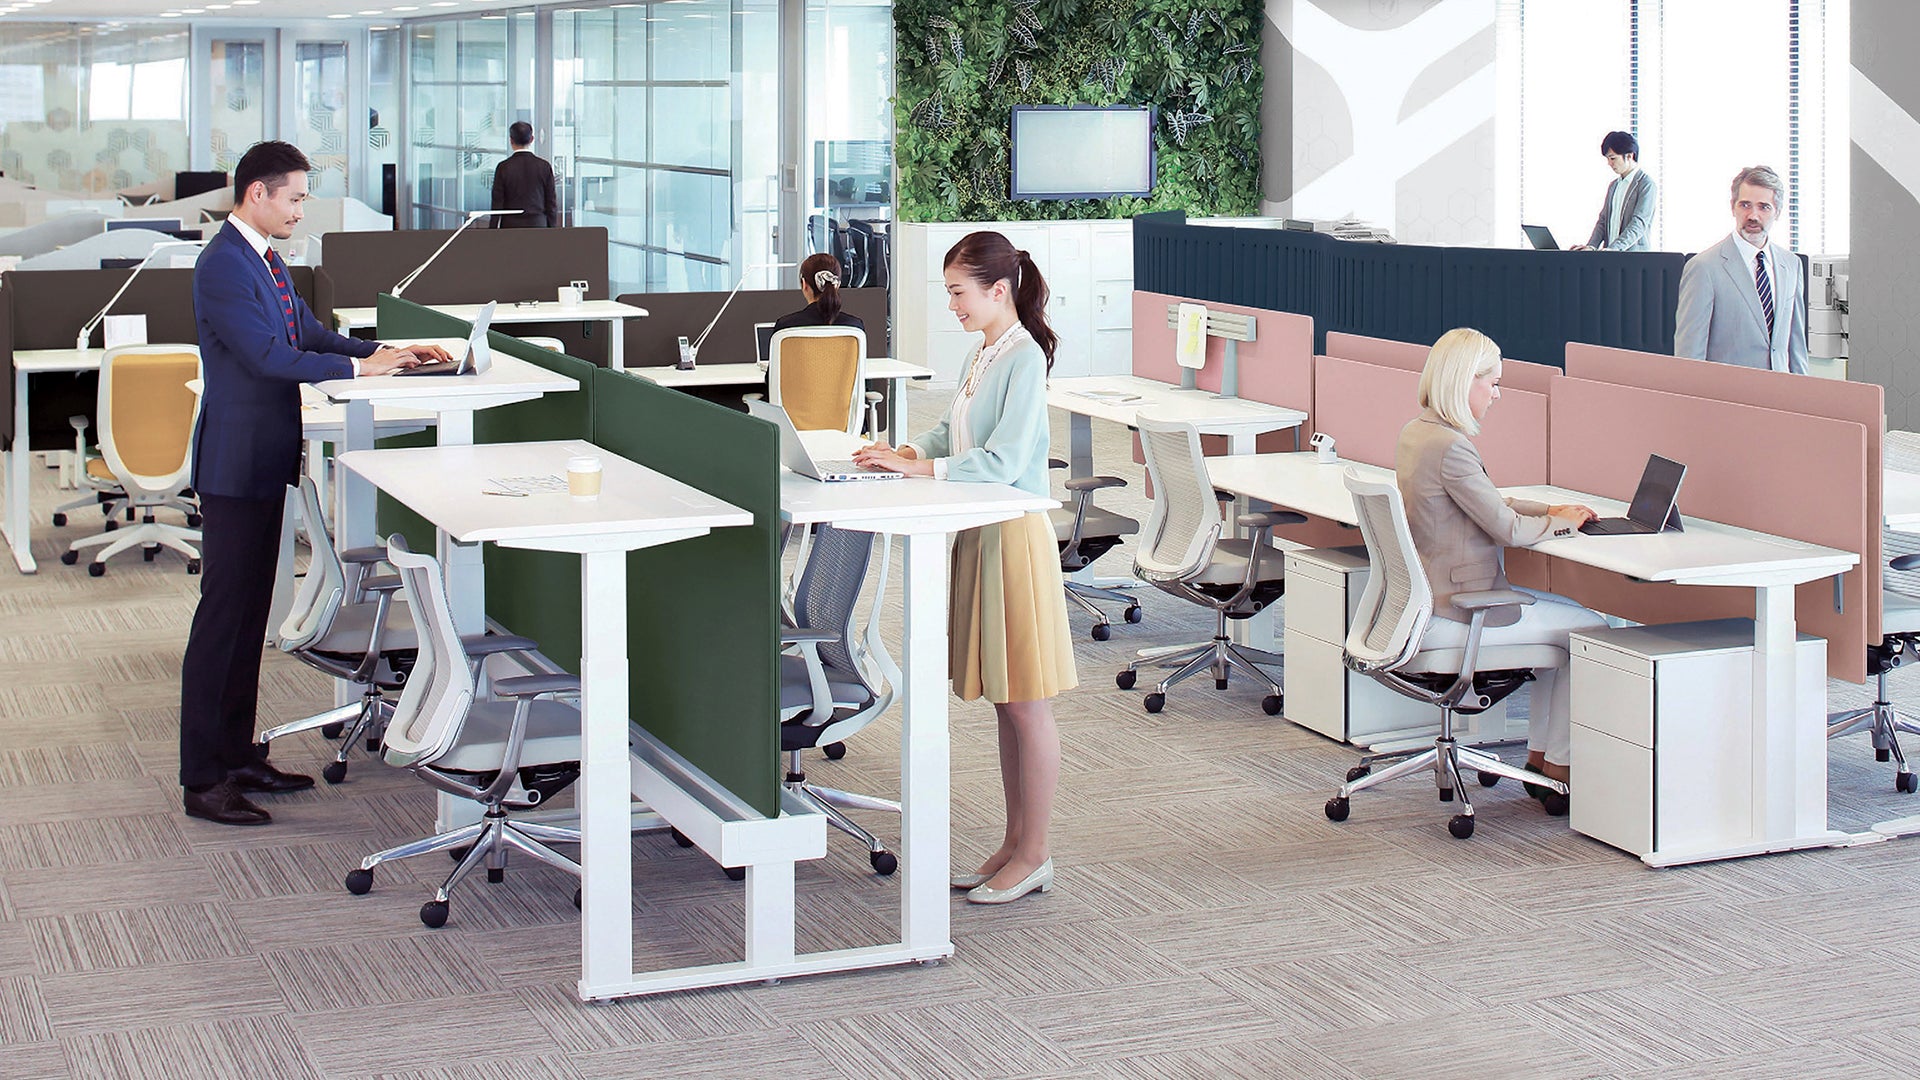 Why do people use standing desks in offices?